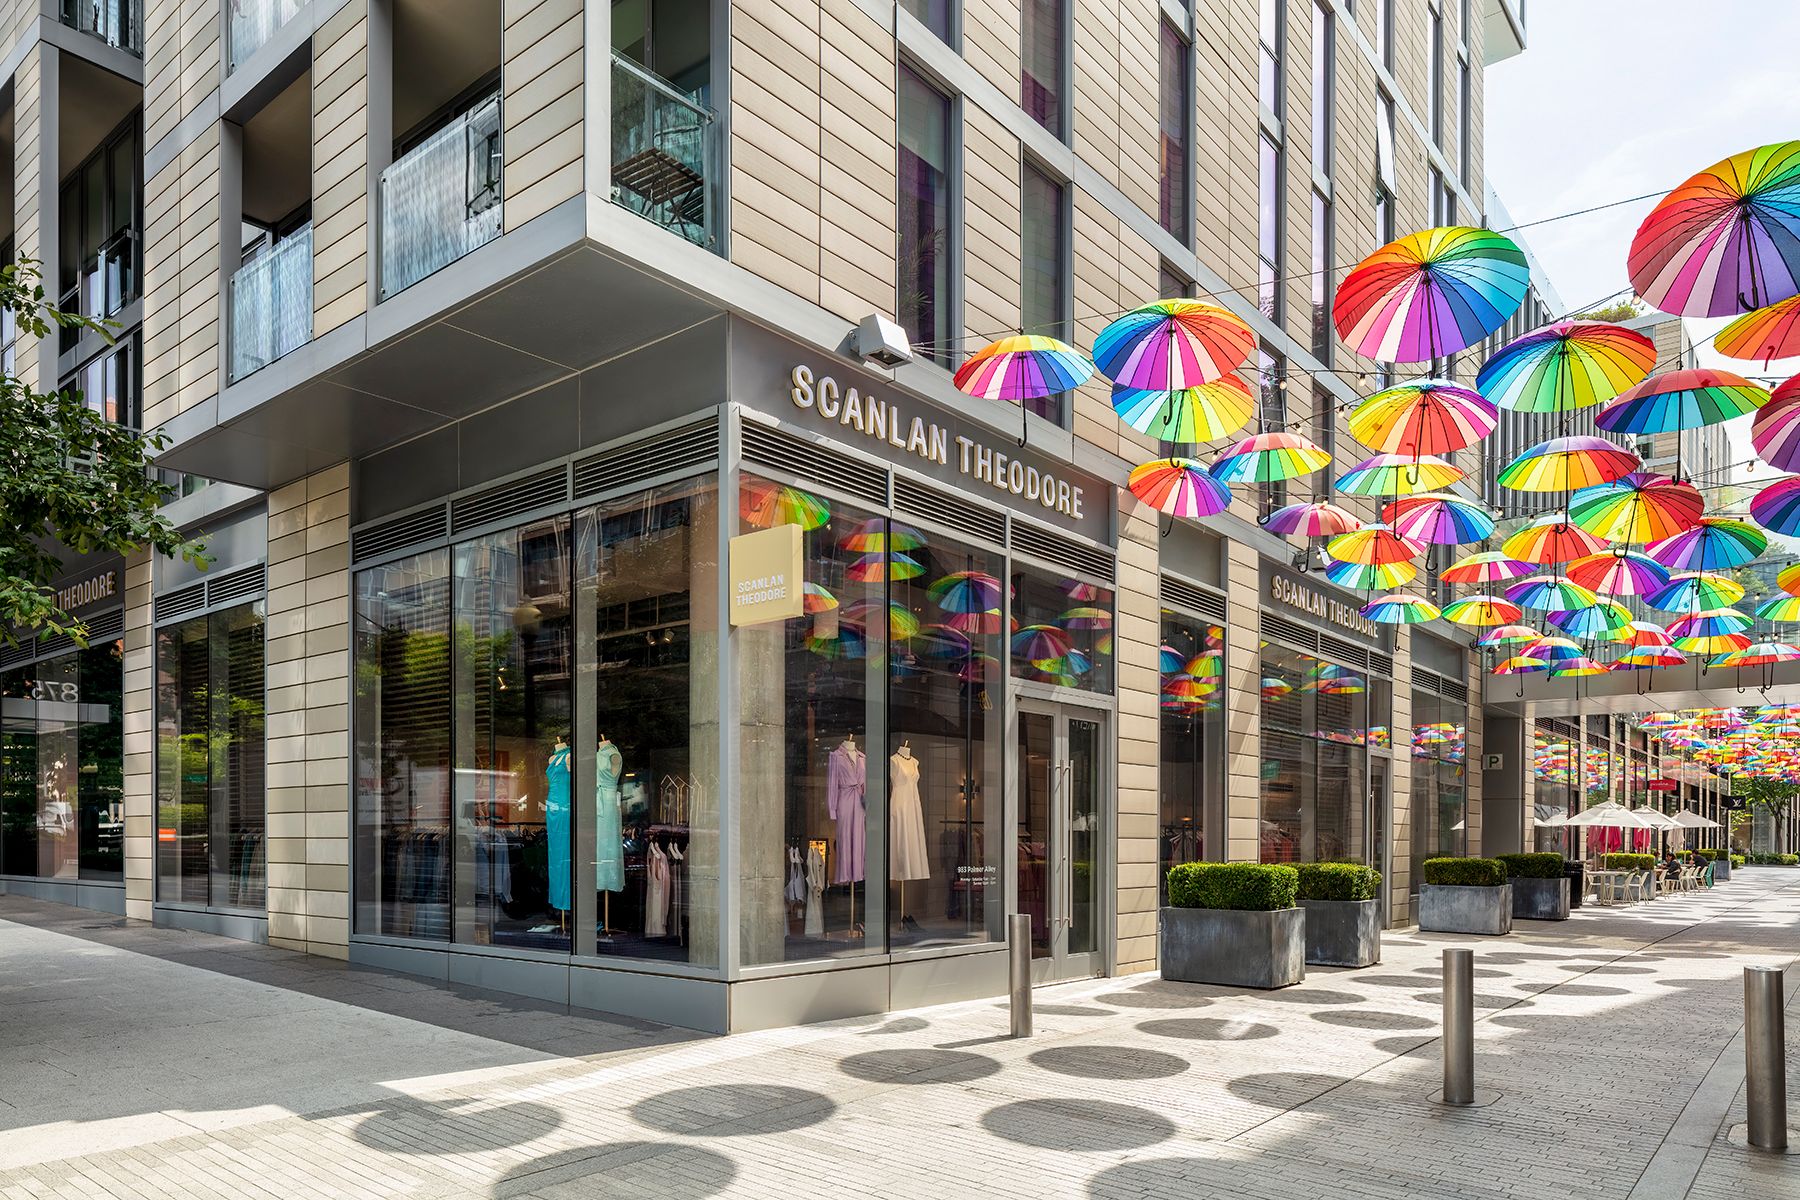 Storefront of the Scanlan Theodore Washington D.C. store with laneway decorations of rainbow-coloured rainbows